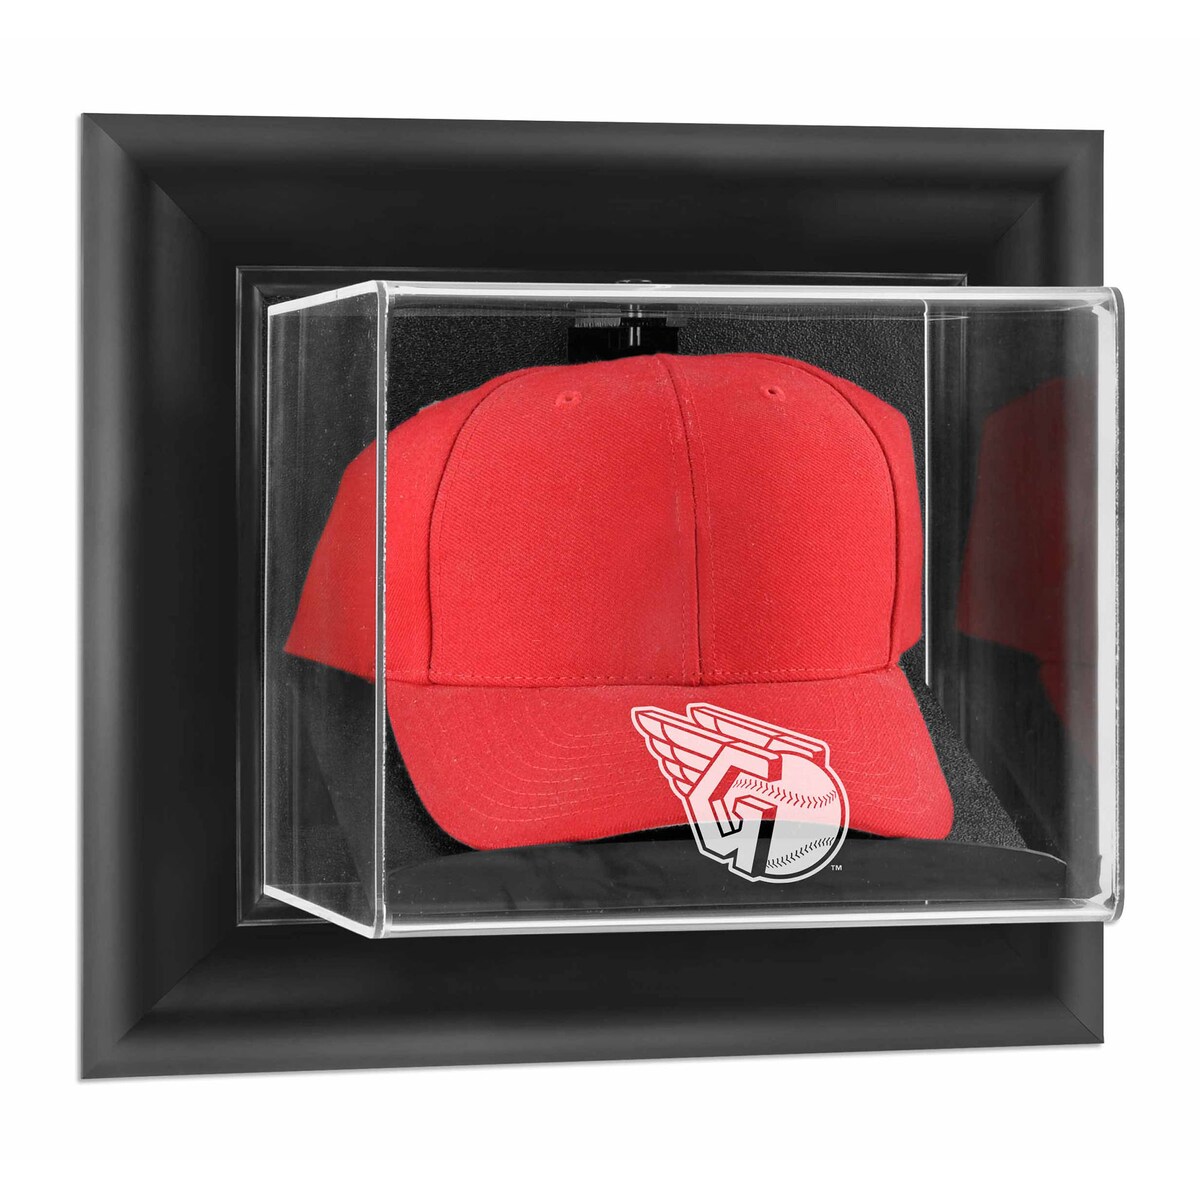 Take your collection of Cleveland Guardians memorabilia to the next level with this Black Framed Wall-Mounted Logo Cap Display Case. Whether displayed in your home or office, it's the perfect way to highlight your passion for the Cleveland Guardians for years to come.Memorabilia not includedDisplay case measures approx. 18'' x 17'' x 15''Ready to hangOfficially licensedBrand: Fanatics Authentic